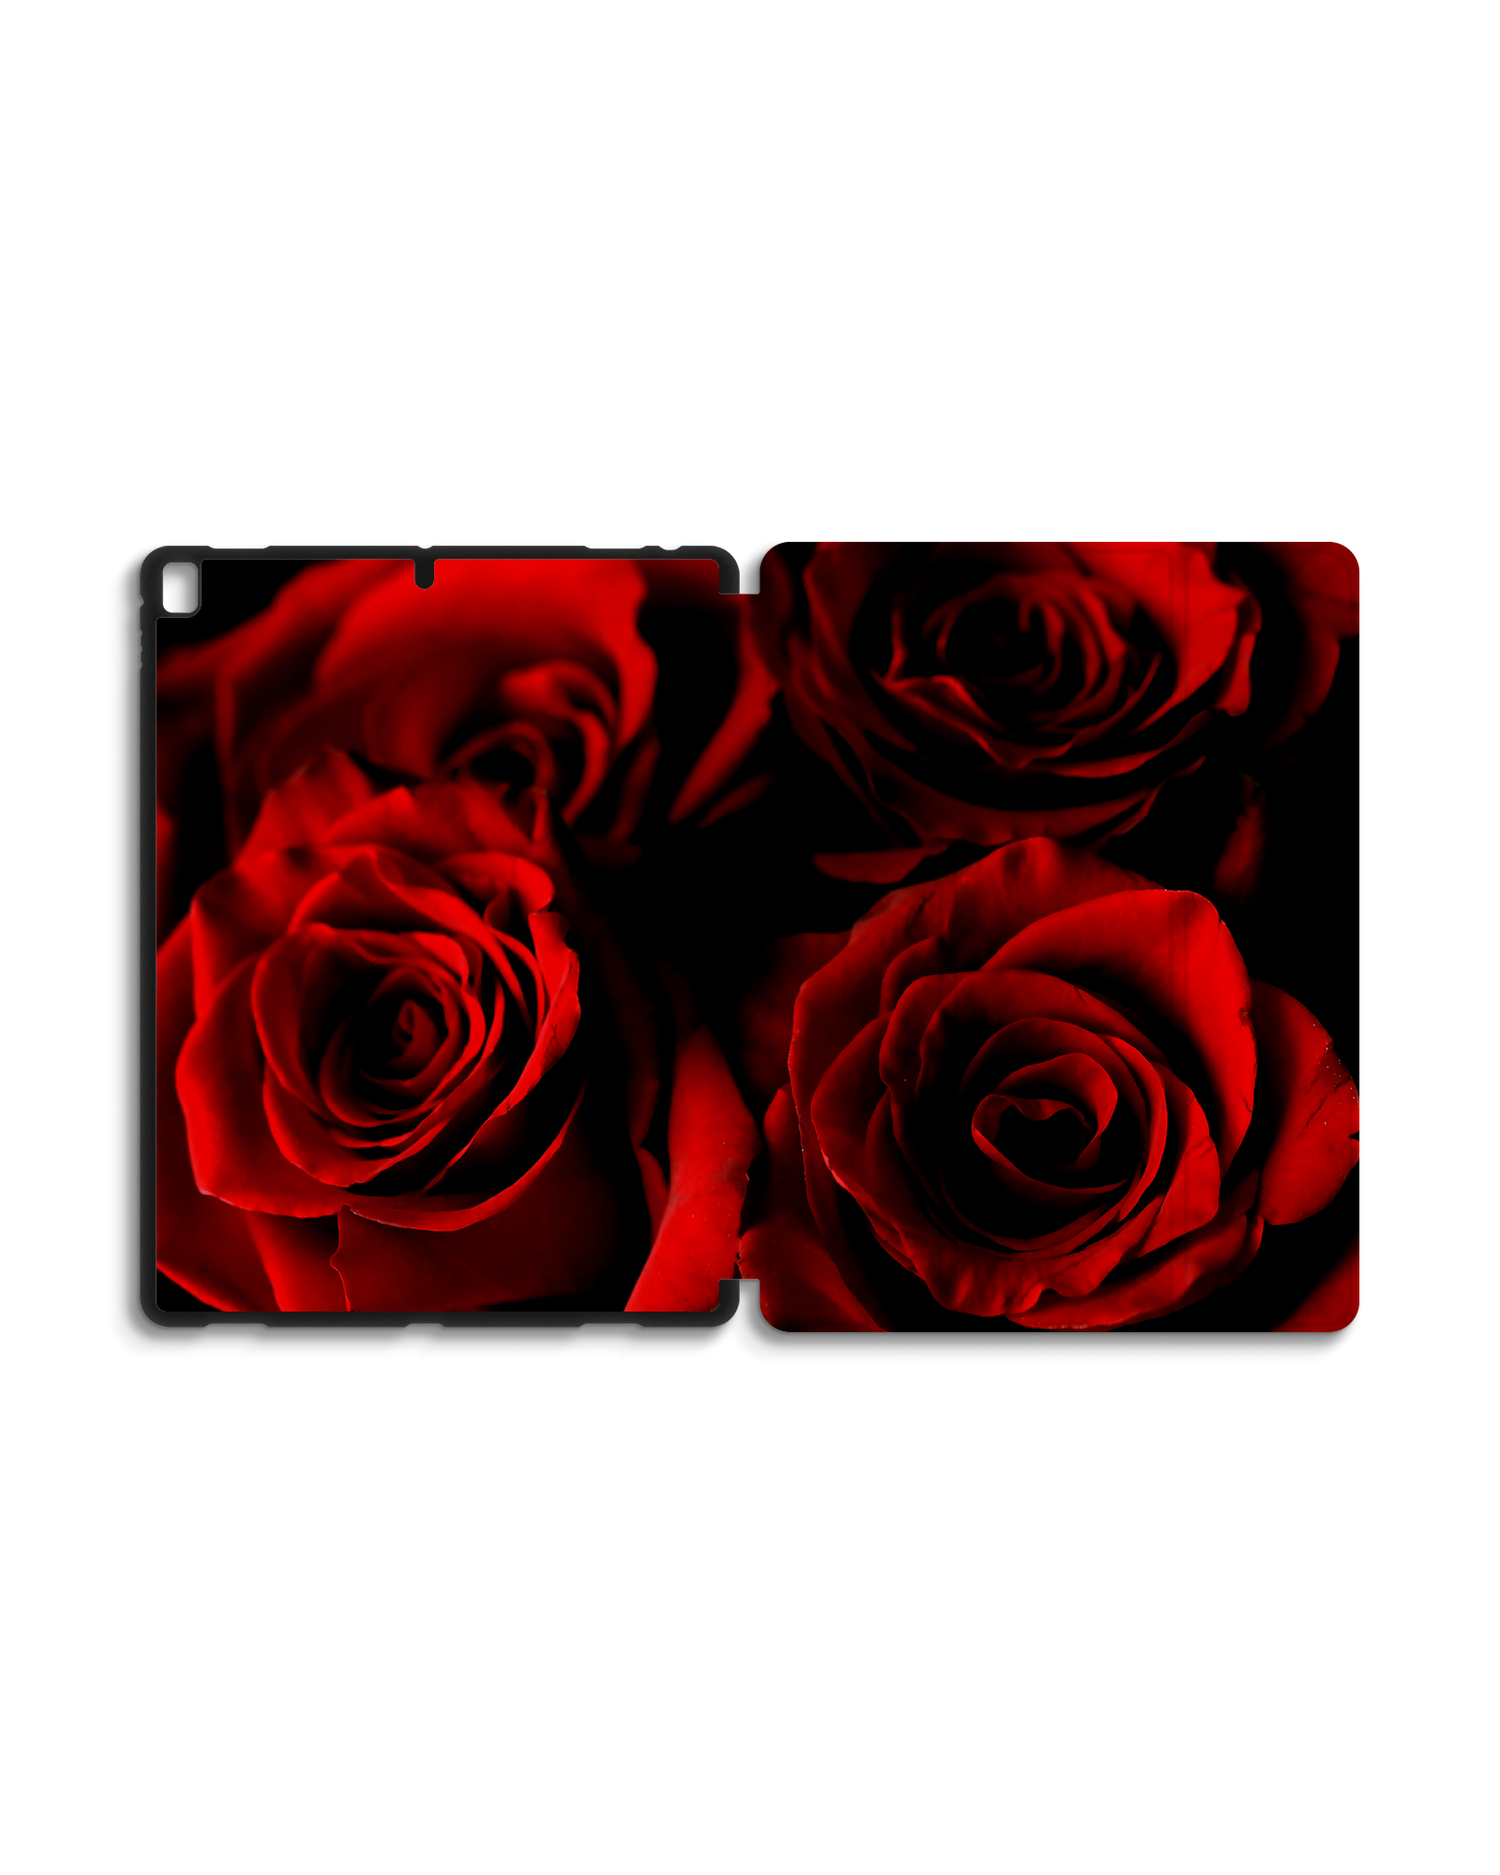 Red Roses iPad Case with Pencil Holder for Apple iPad Pro 2 12.9